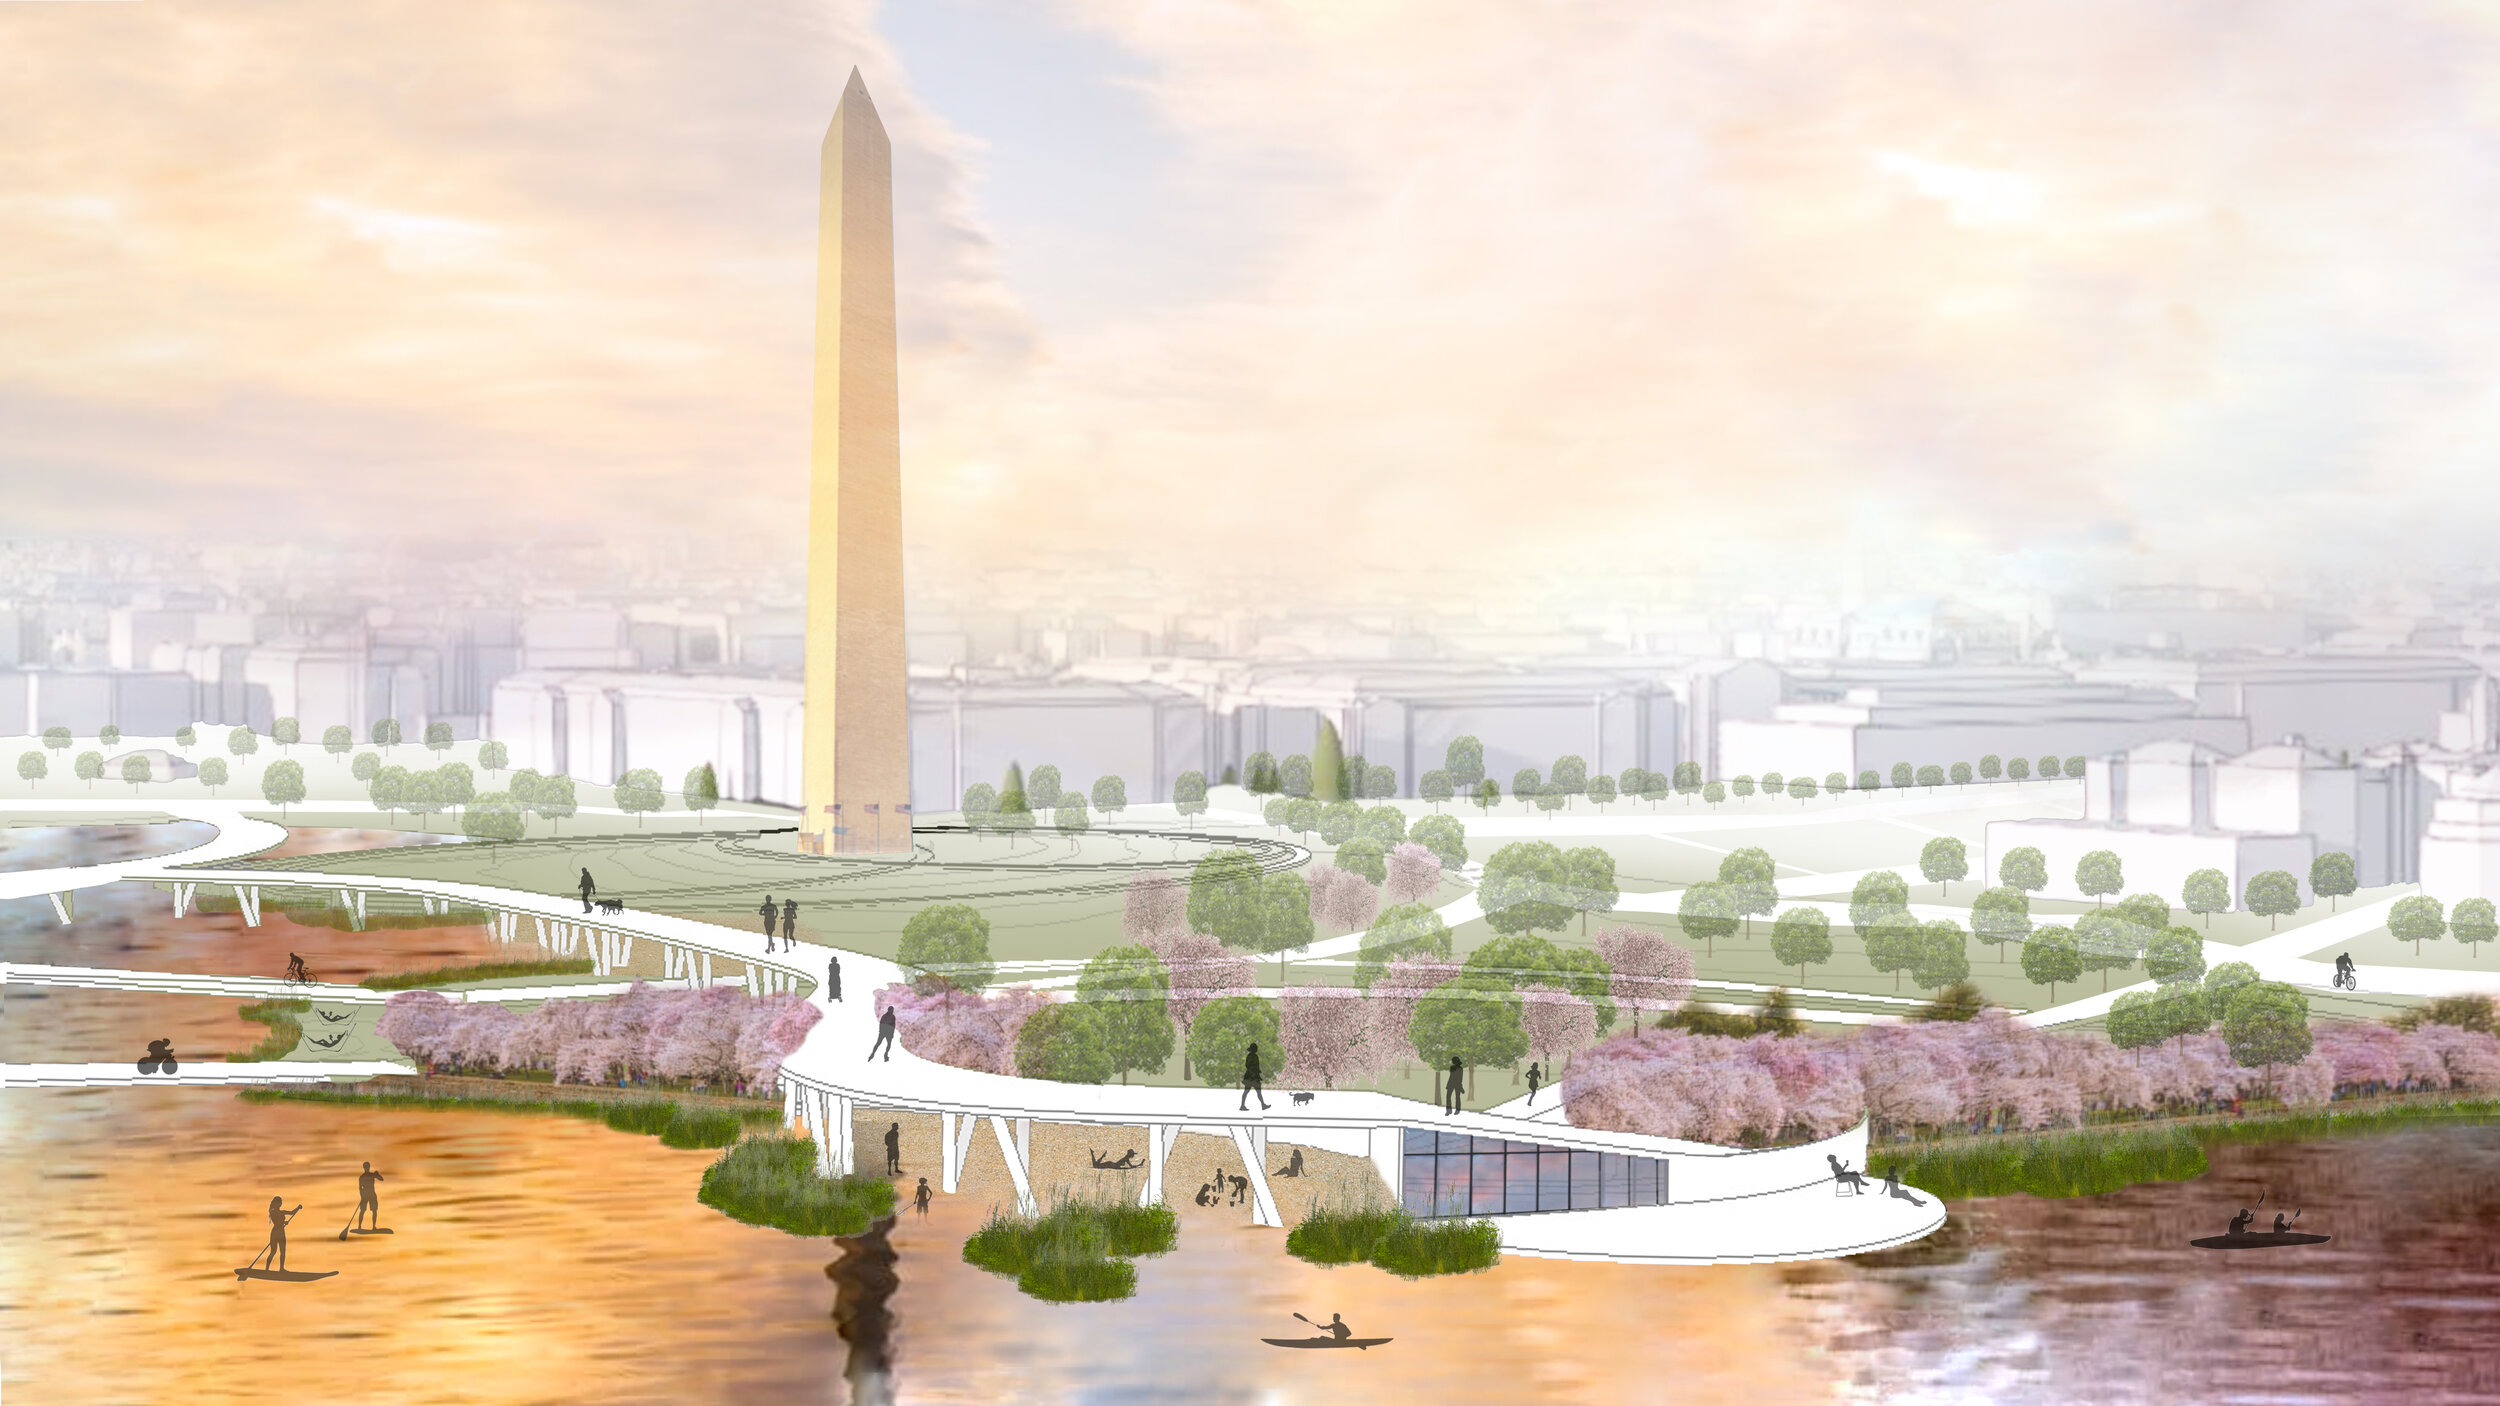  A new boathouse and elevated pedestrian walkways allow the monuments to be experienced in a new way. 